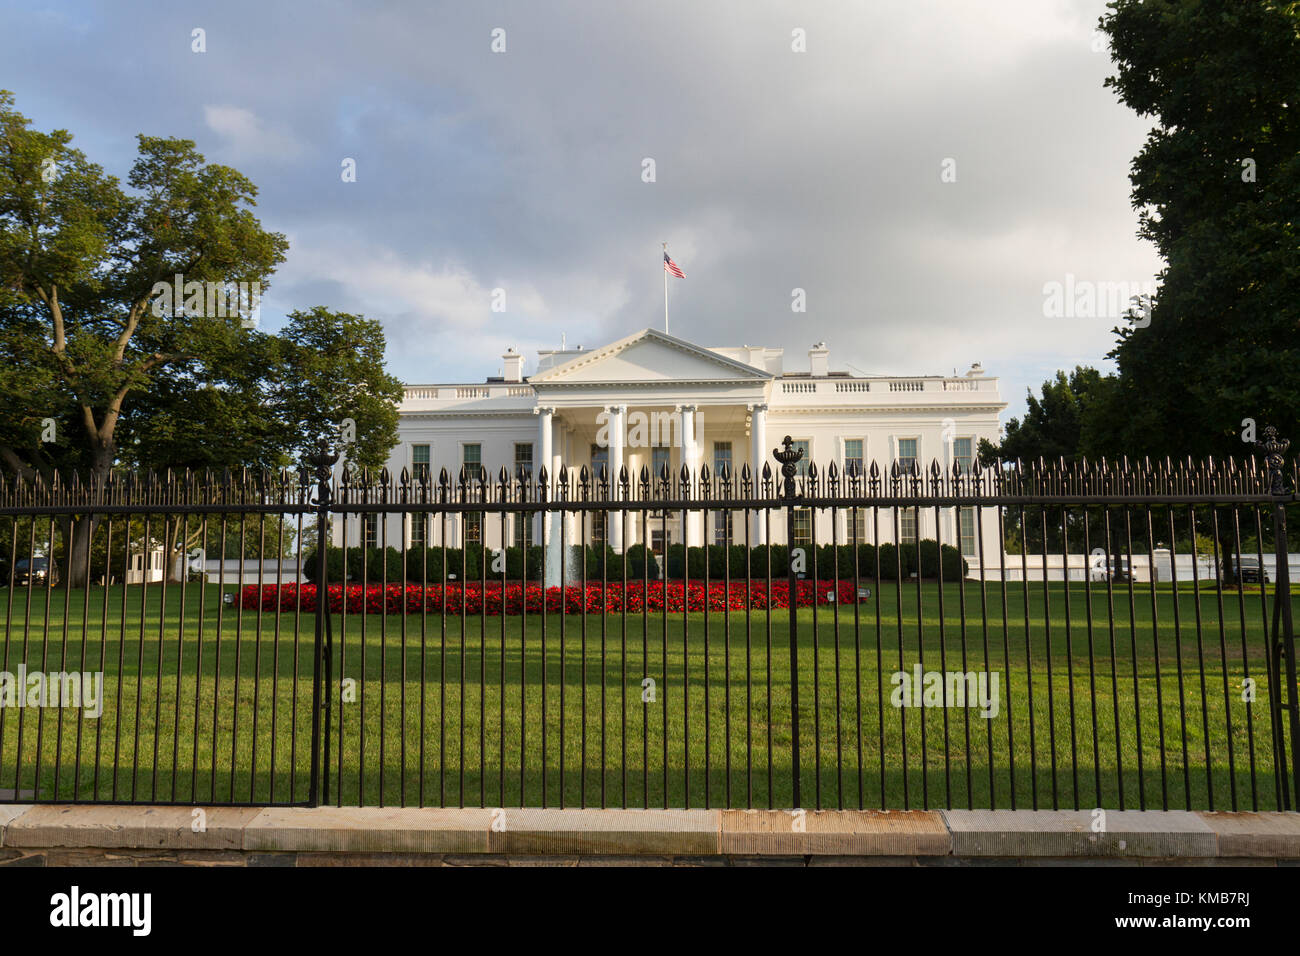 The North Portico of the White House is the official residence and workplace of the President of the United States, Washington DC. Stock Photo